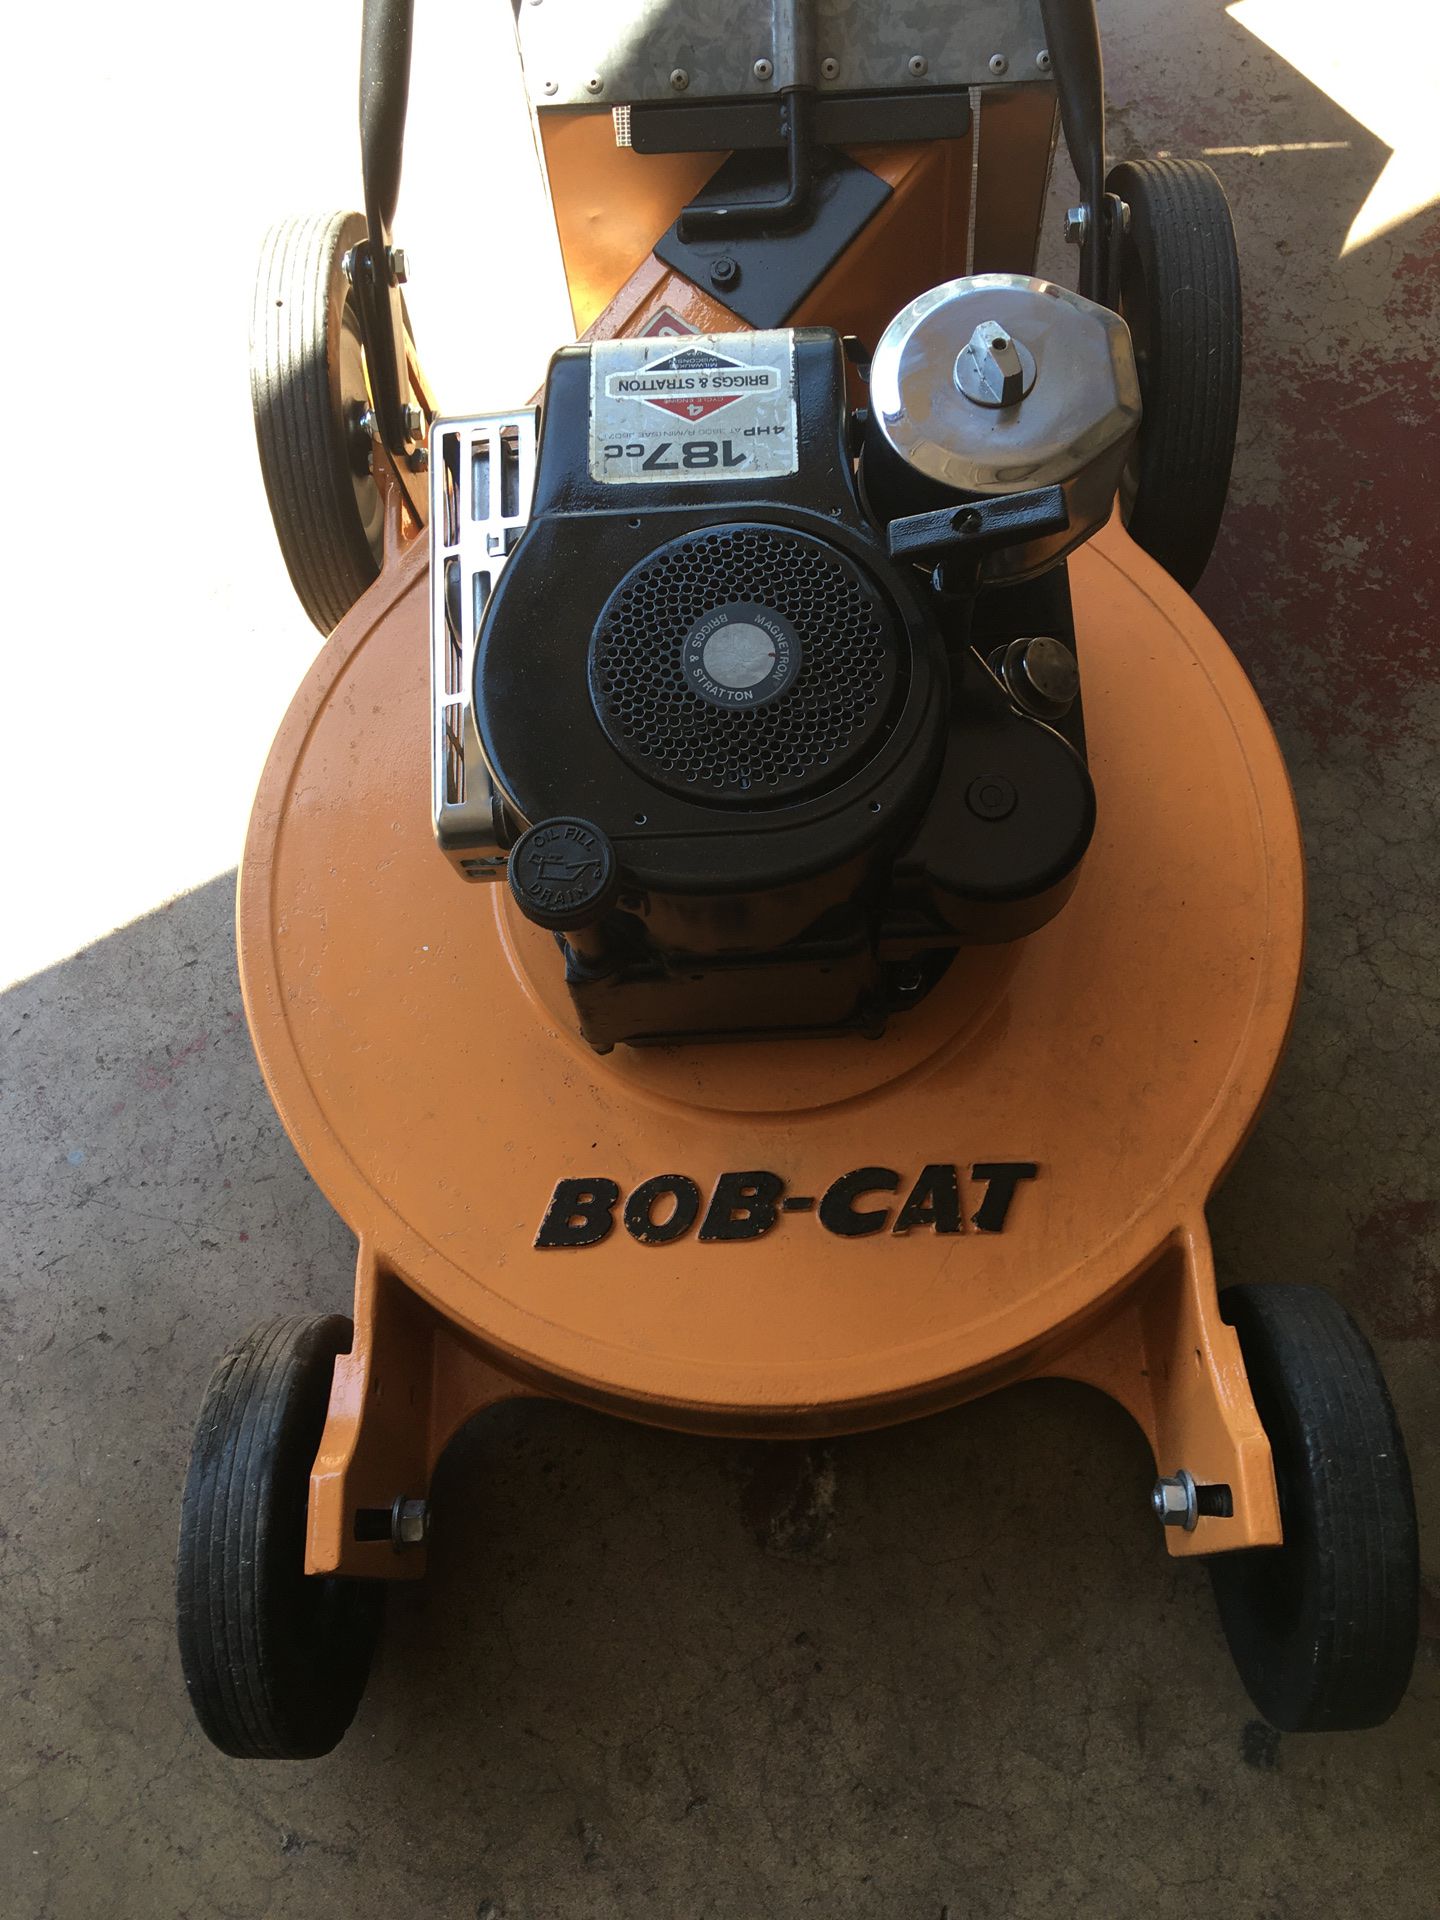 Bobcat refurbished nice and ready to work